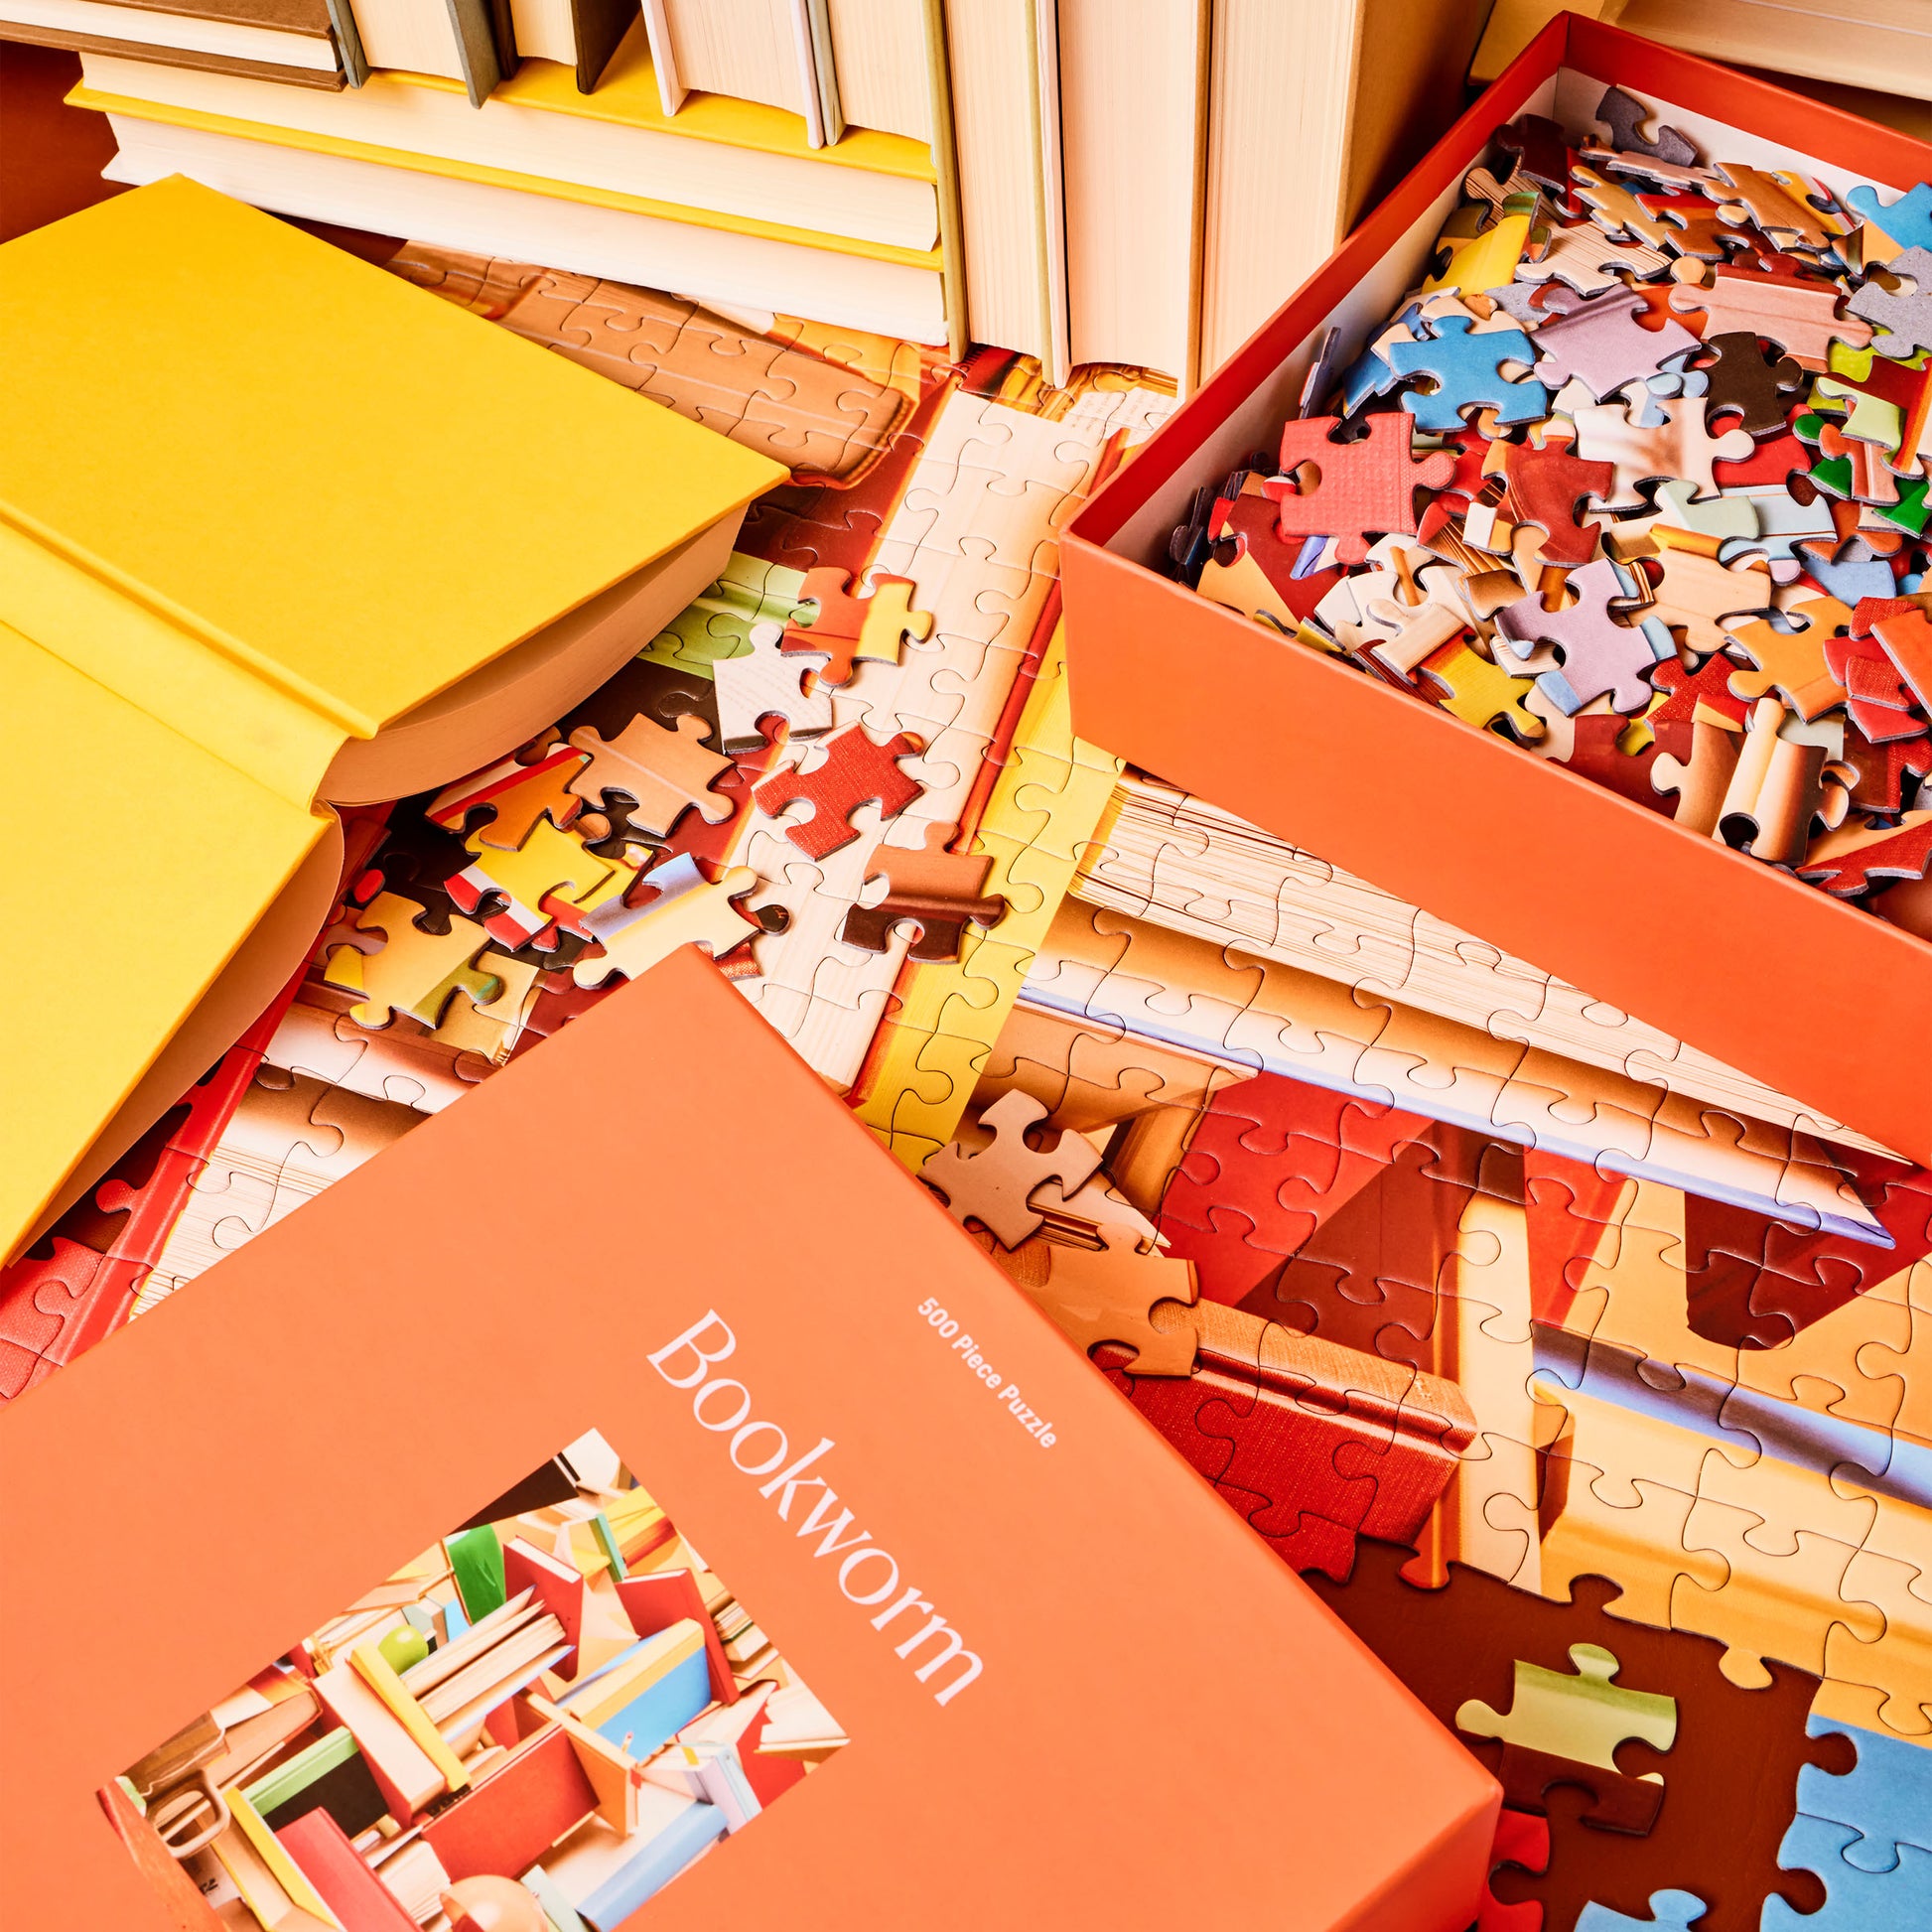 Box for Bookworm, a 500-Piece Puzzle from Piecework Puzzles, placed in a scene of books, a box of puzzle pieces, and the partially completed Bookworm puzzle.